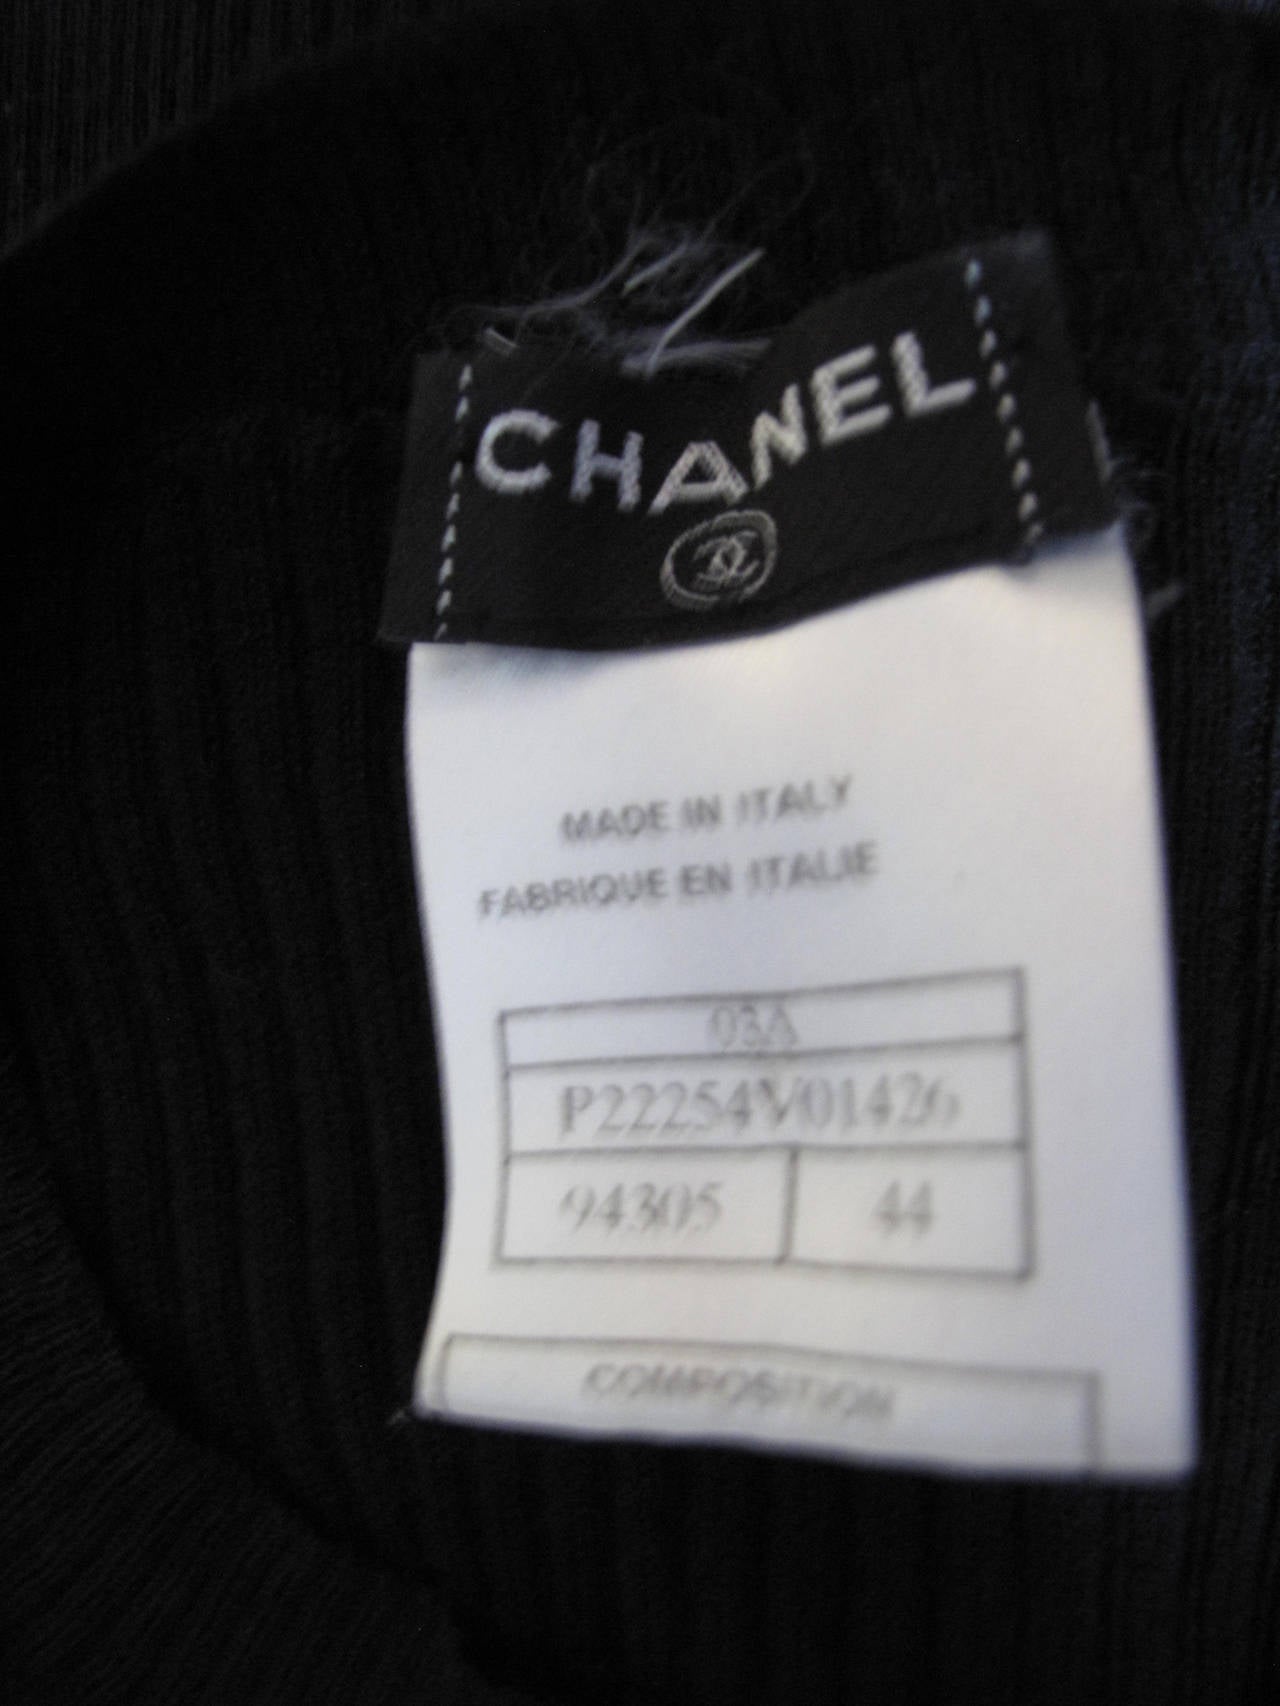 Women's 2003 Chanel Black Cashmere Sweater with 